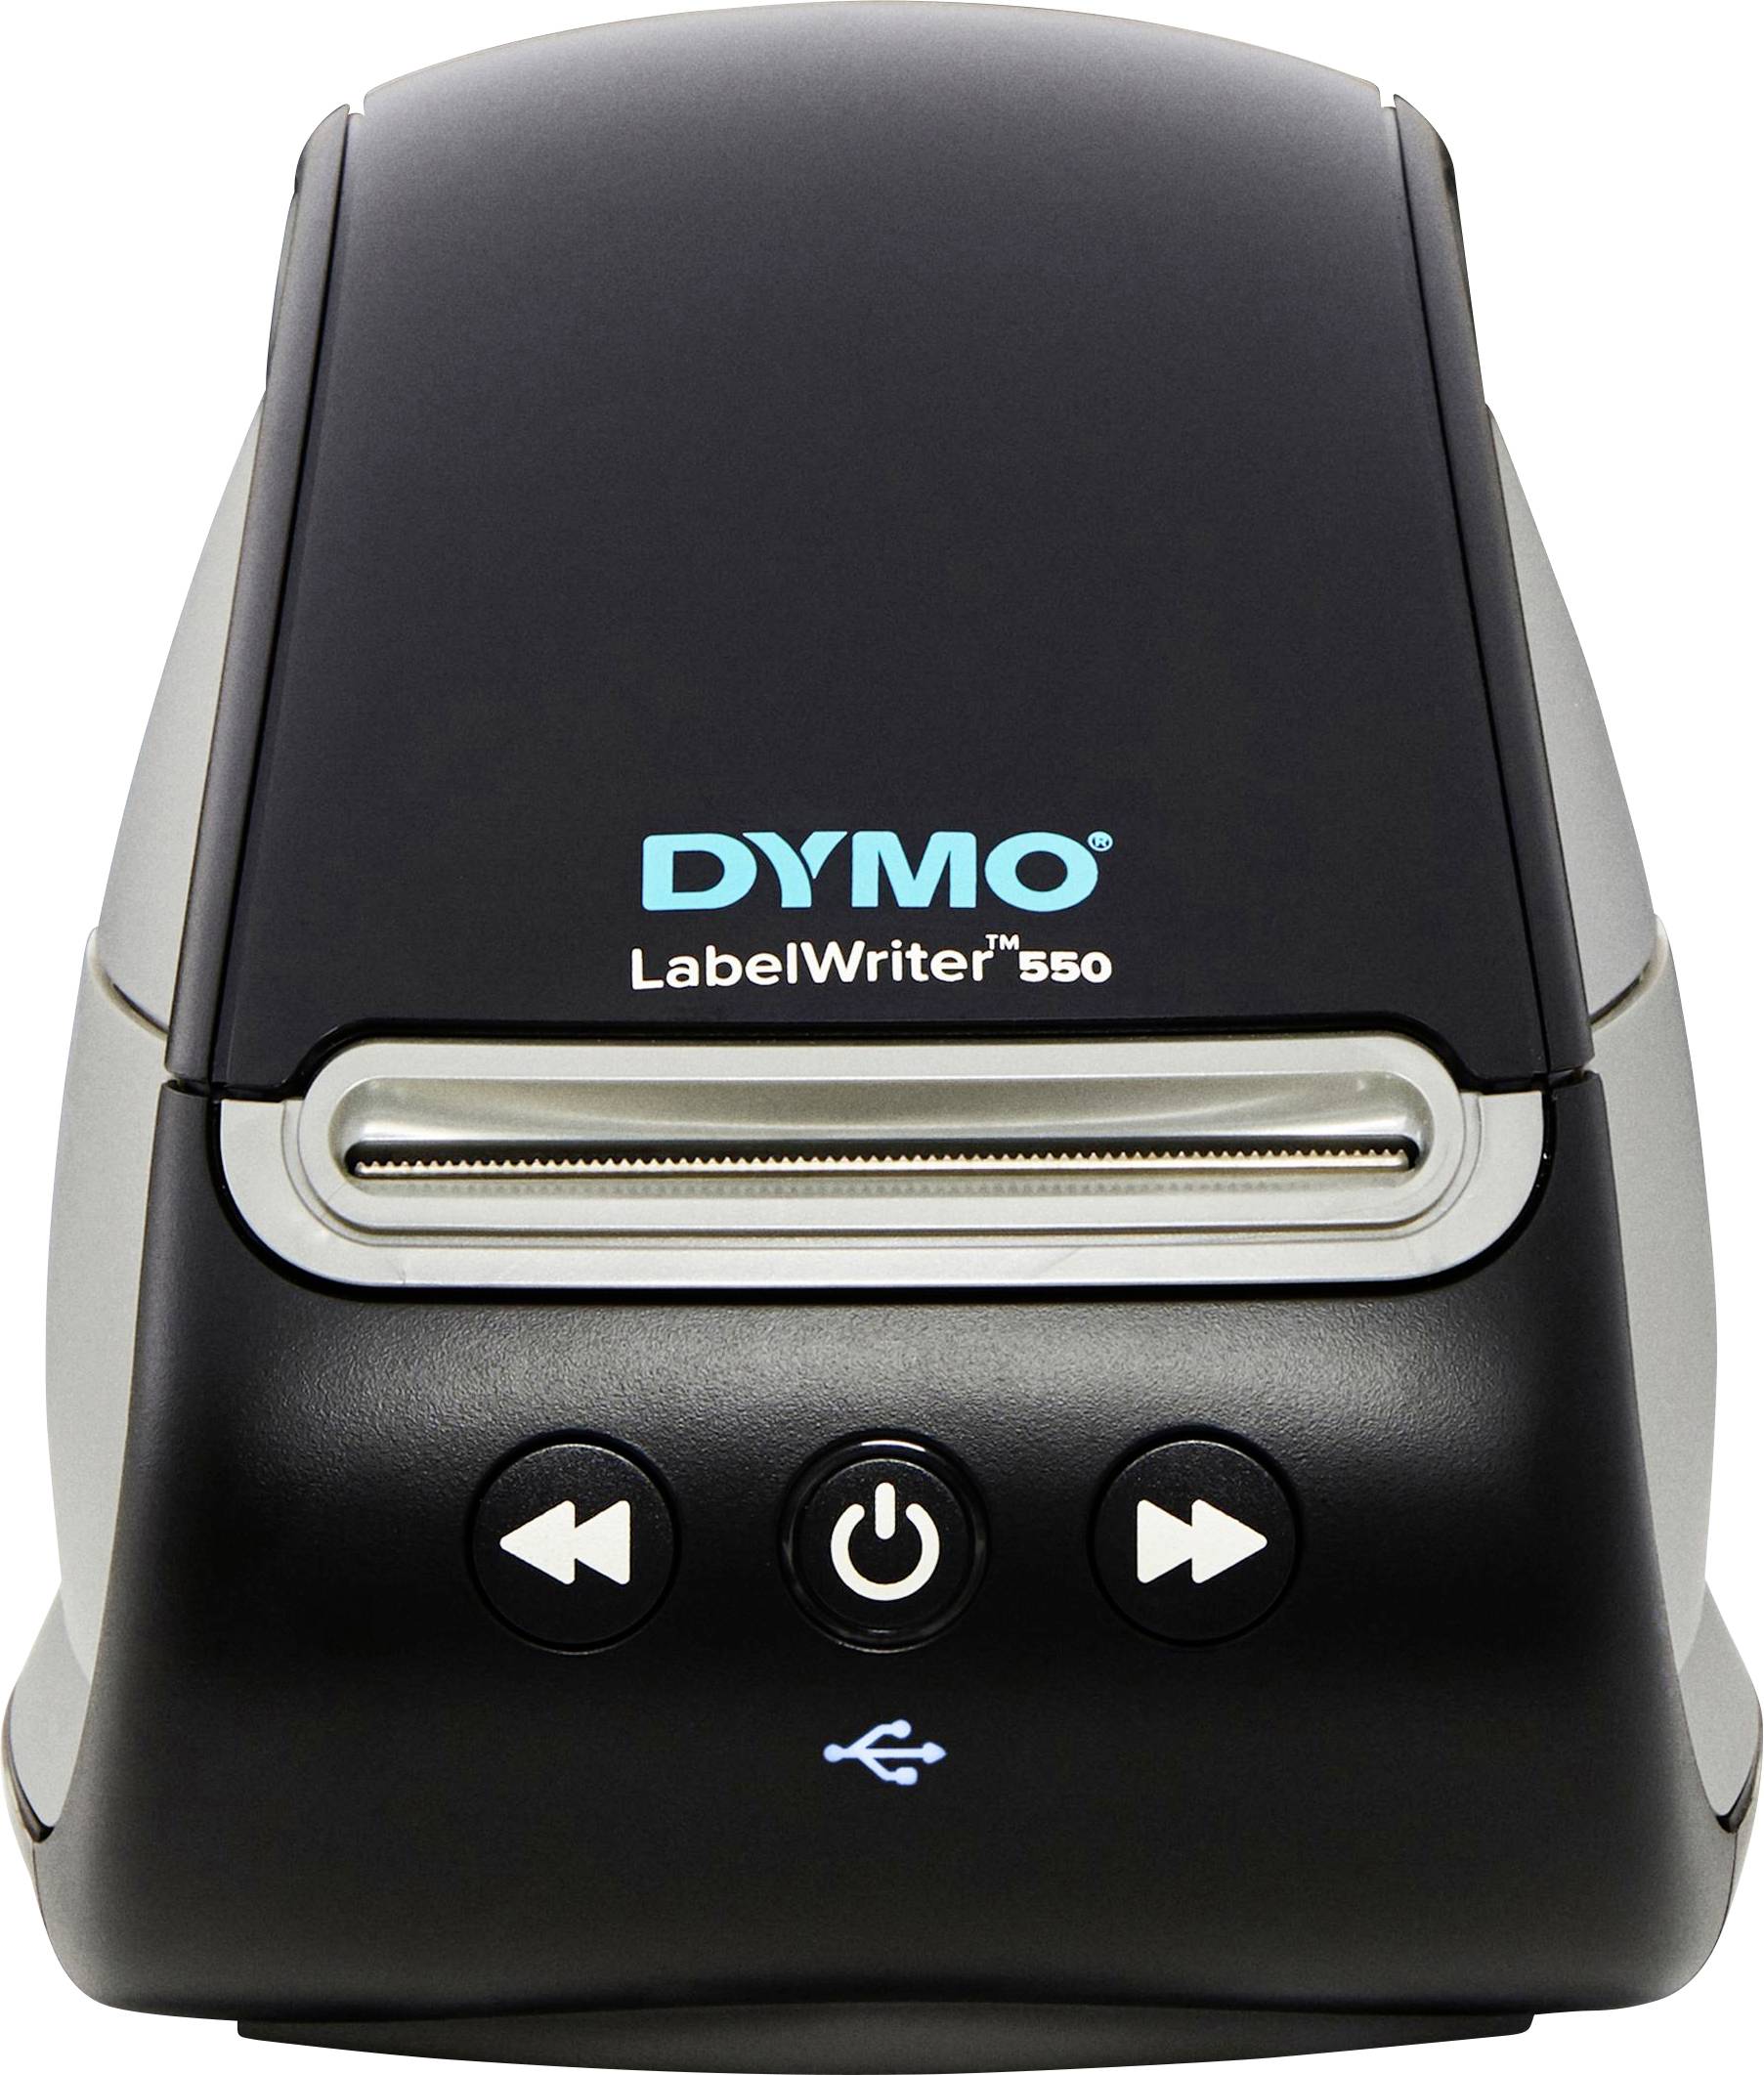 download software for dymo labelwriter 400 turbo windows 10